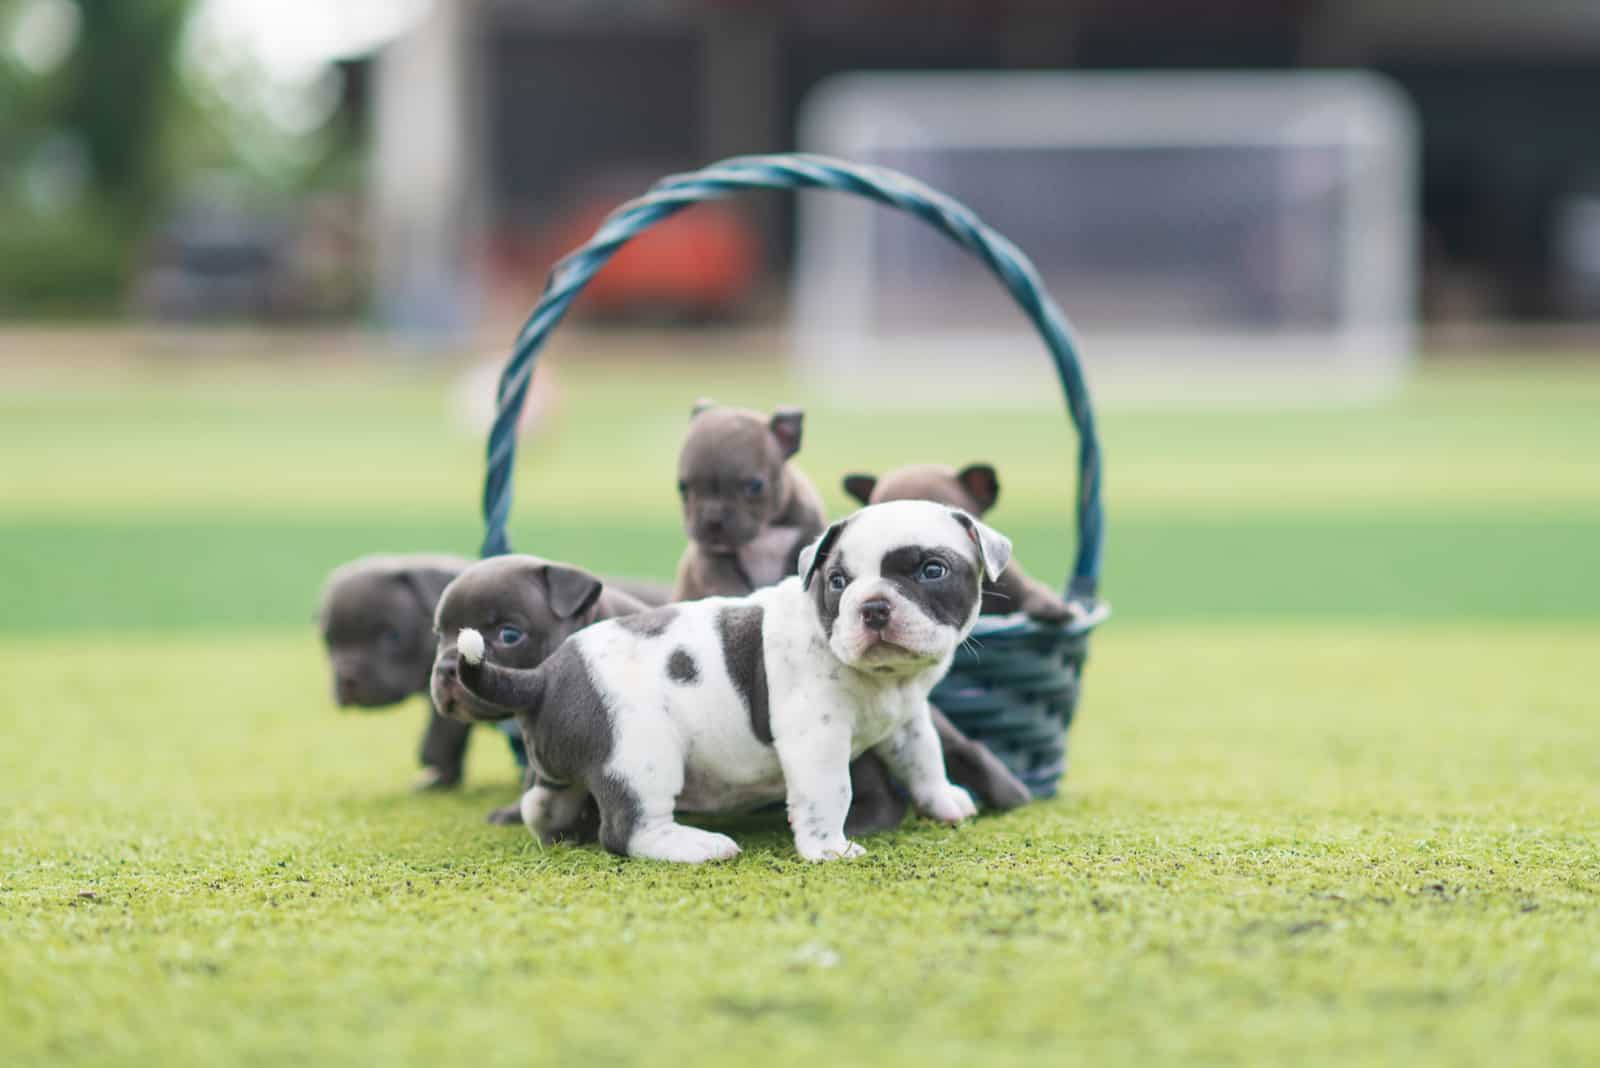 Blue American Bully puppies playing around basket on grass